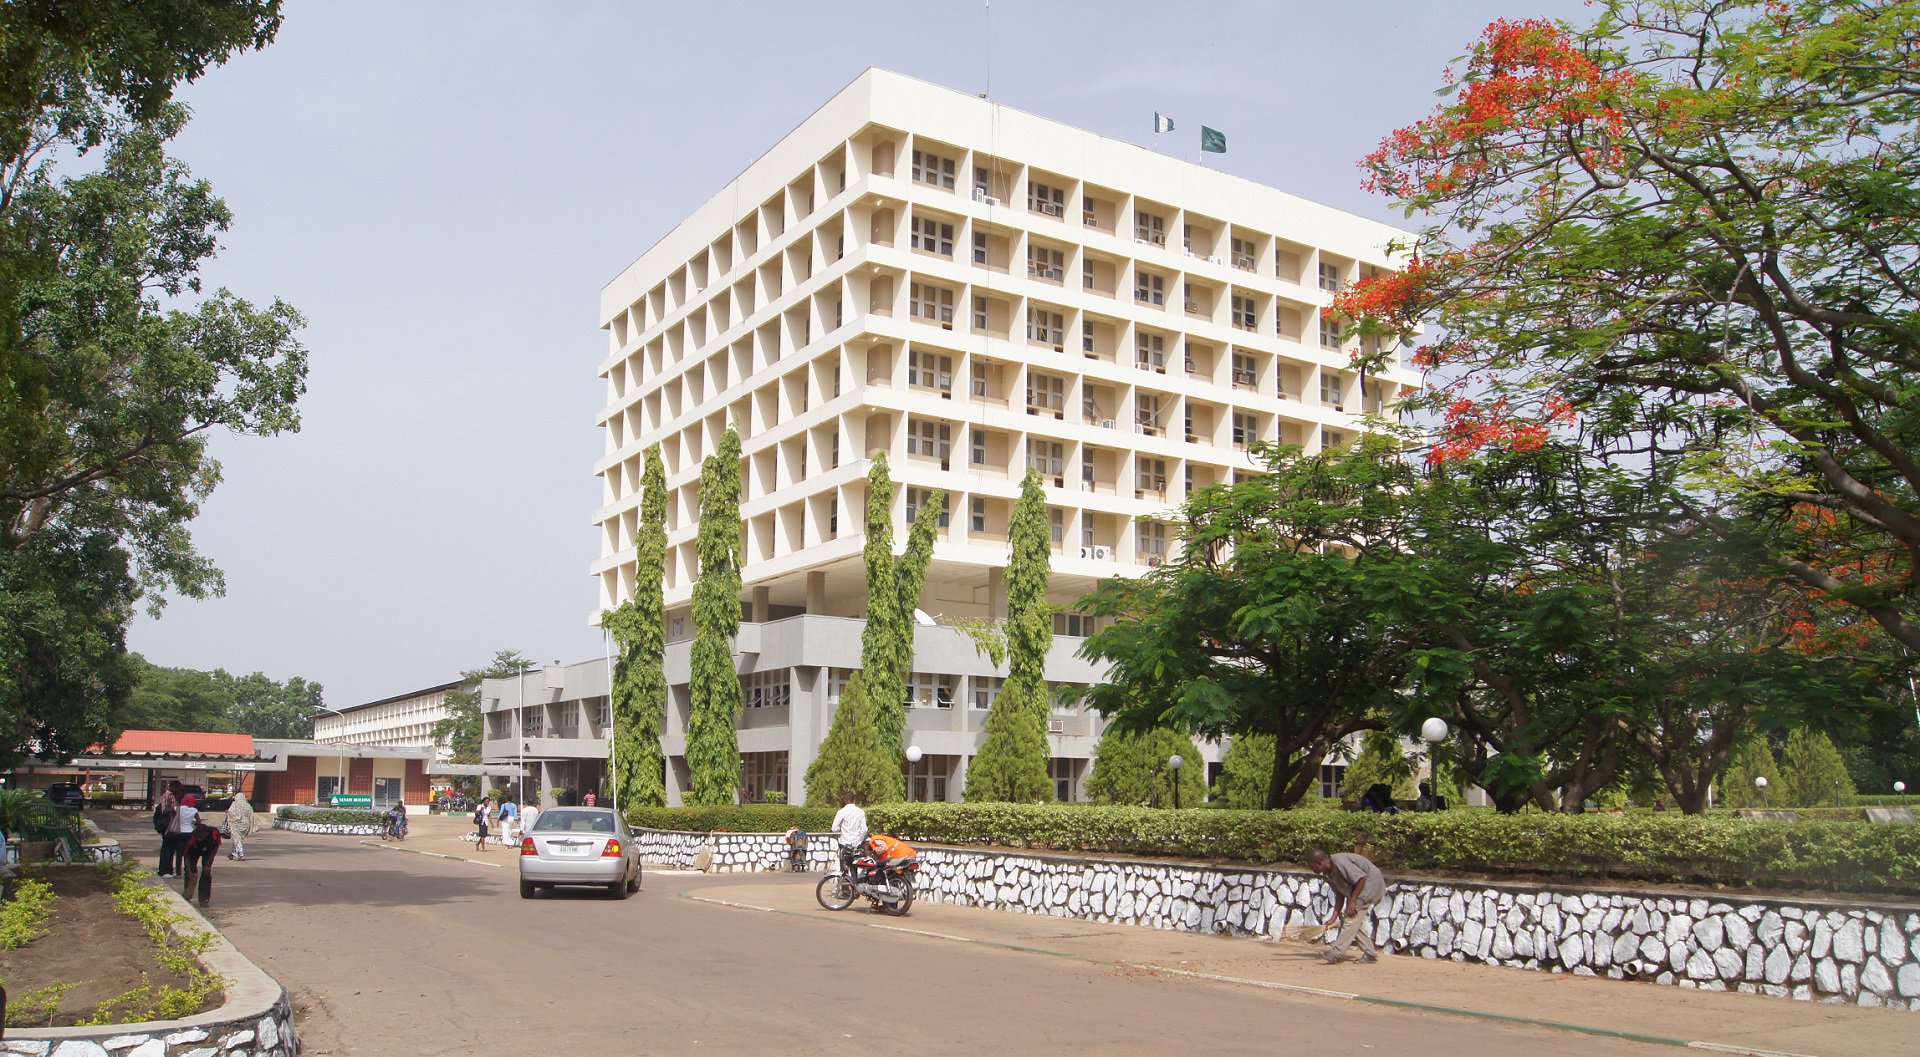 Ahmadu Bello University Sacks 16 Lecturers Over Sexual Harassment Assault And Other Cases